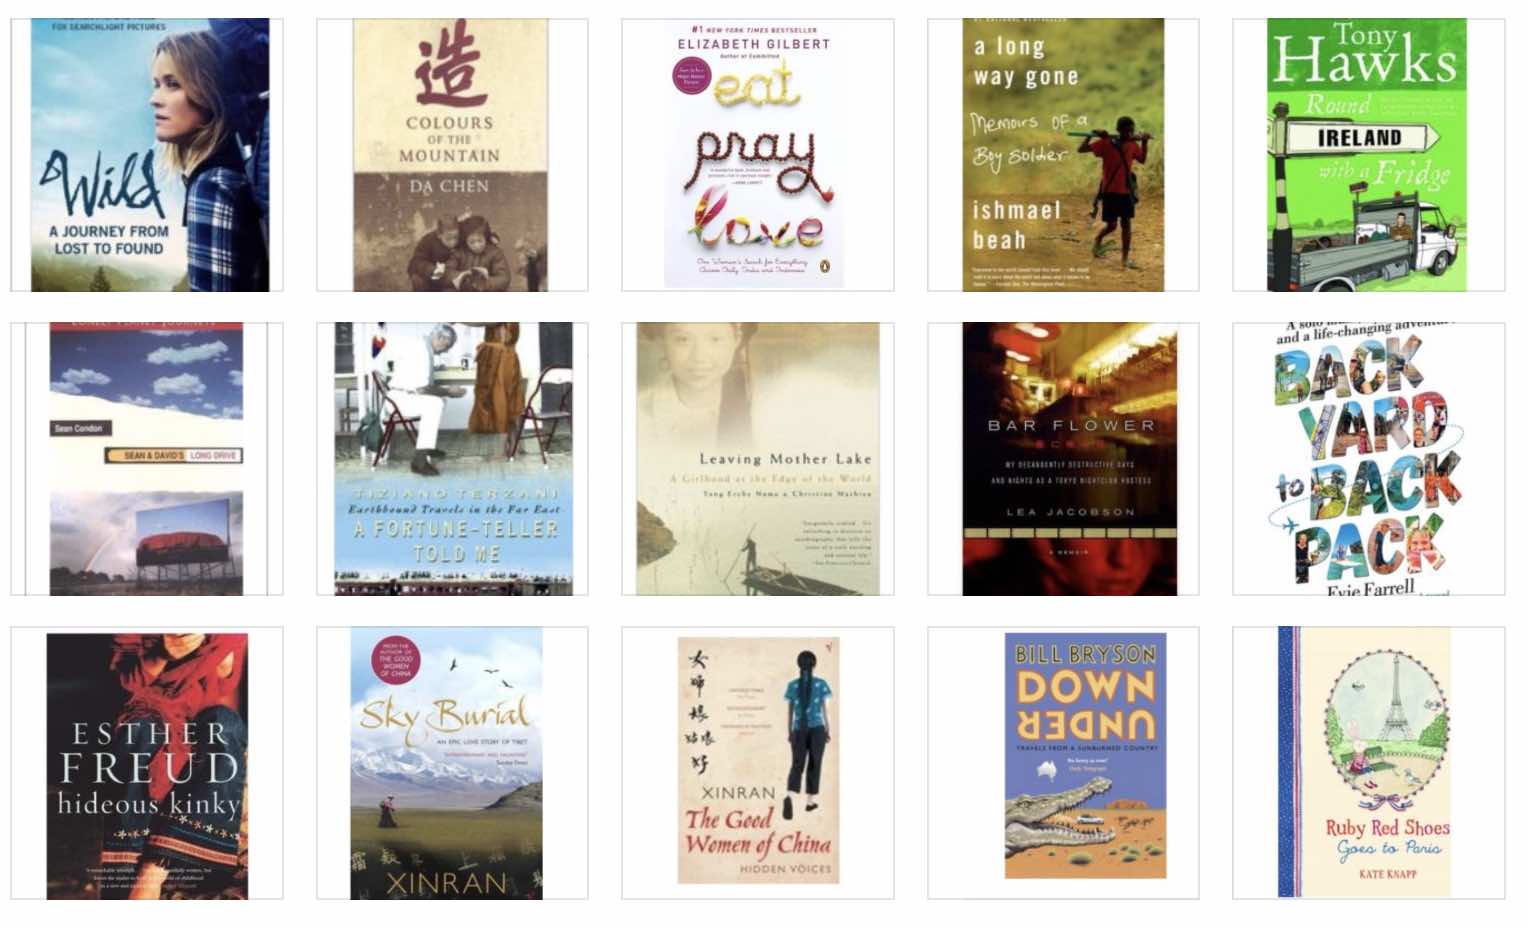 Best travel memoirs for inspiring adventures and empowering women